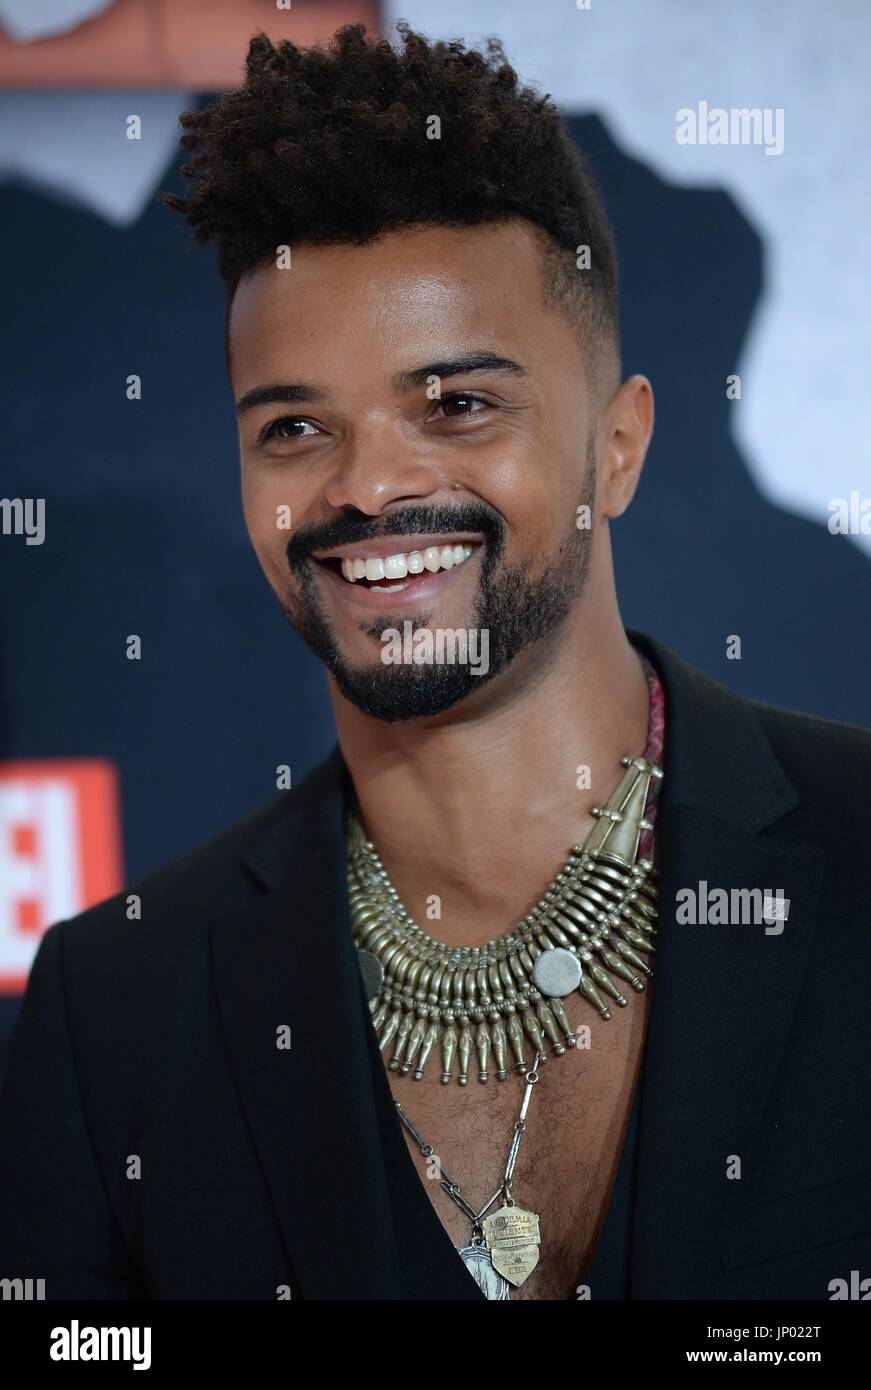 New York, NY, USA. 31st July, 2017. Eka Darville at arrivals for Netflix's Premiere of Marvel's THE DEFENDERS, BMCC Tribeca Performing Arts Center, New York, NY July 31, 2017. Credit: Kristin Callahan/Everett Collection/Alamy Live News Stock Photo